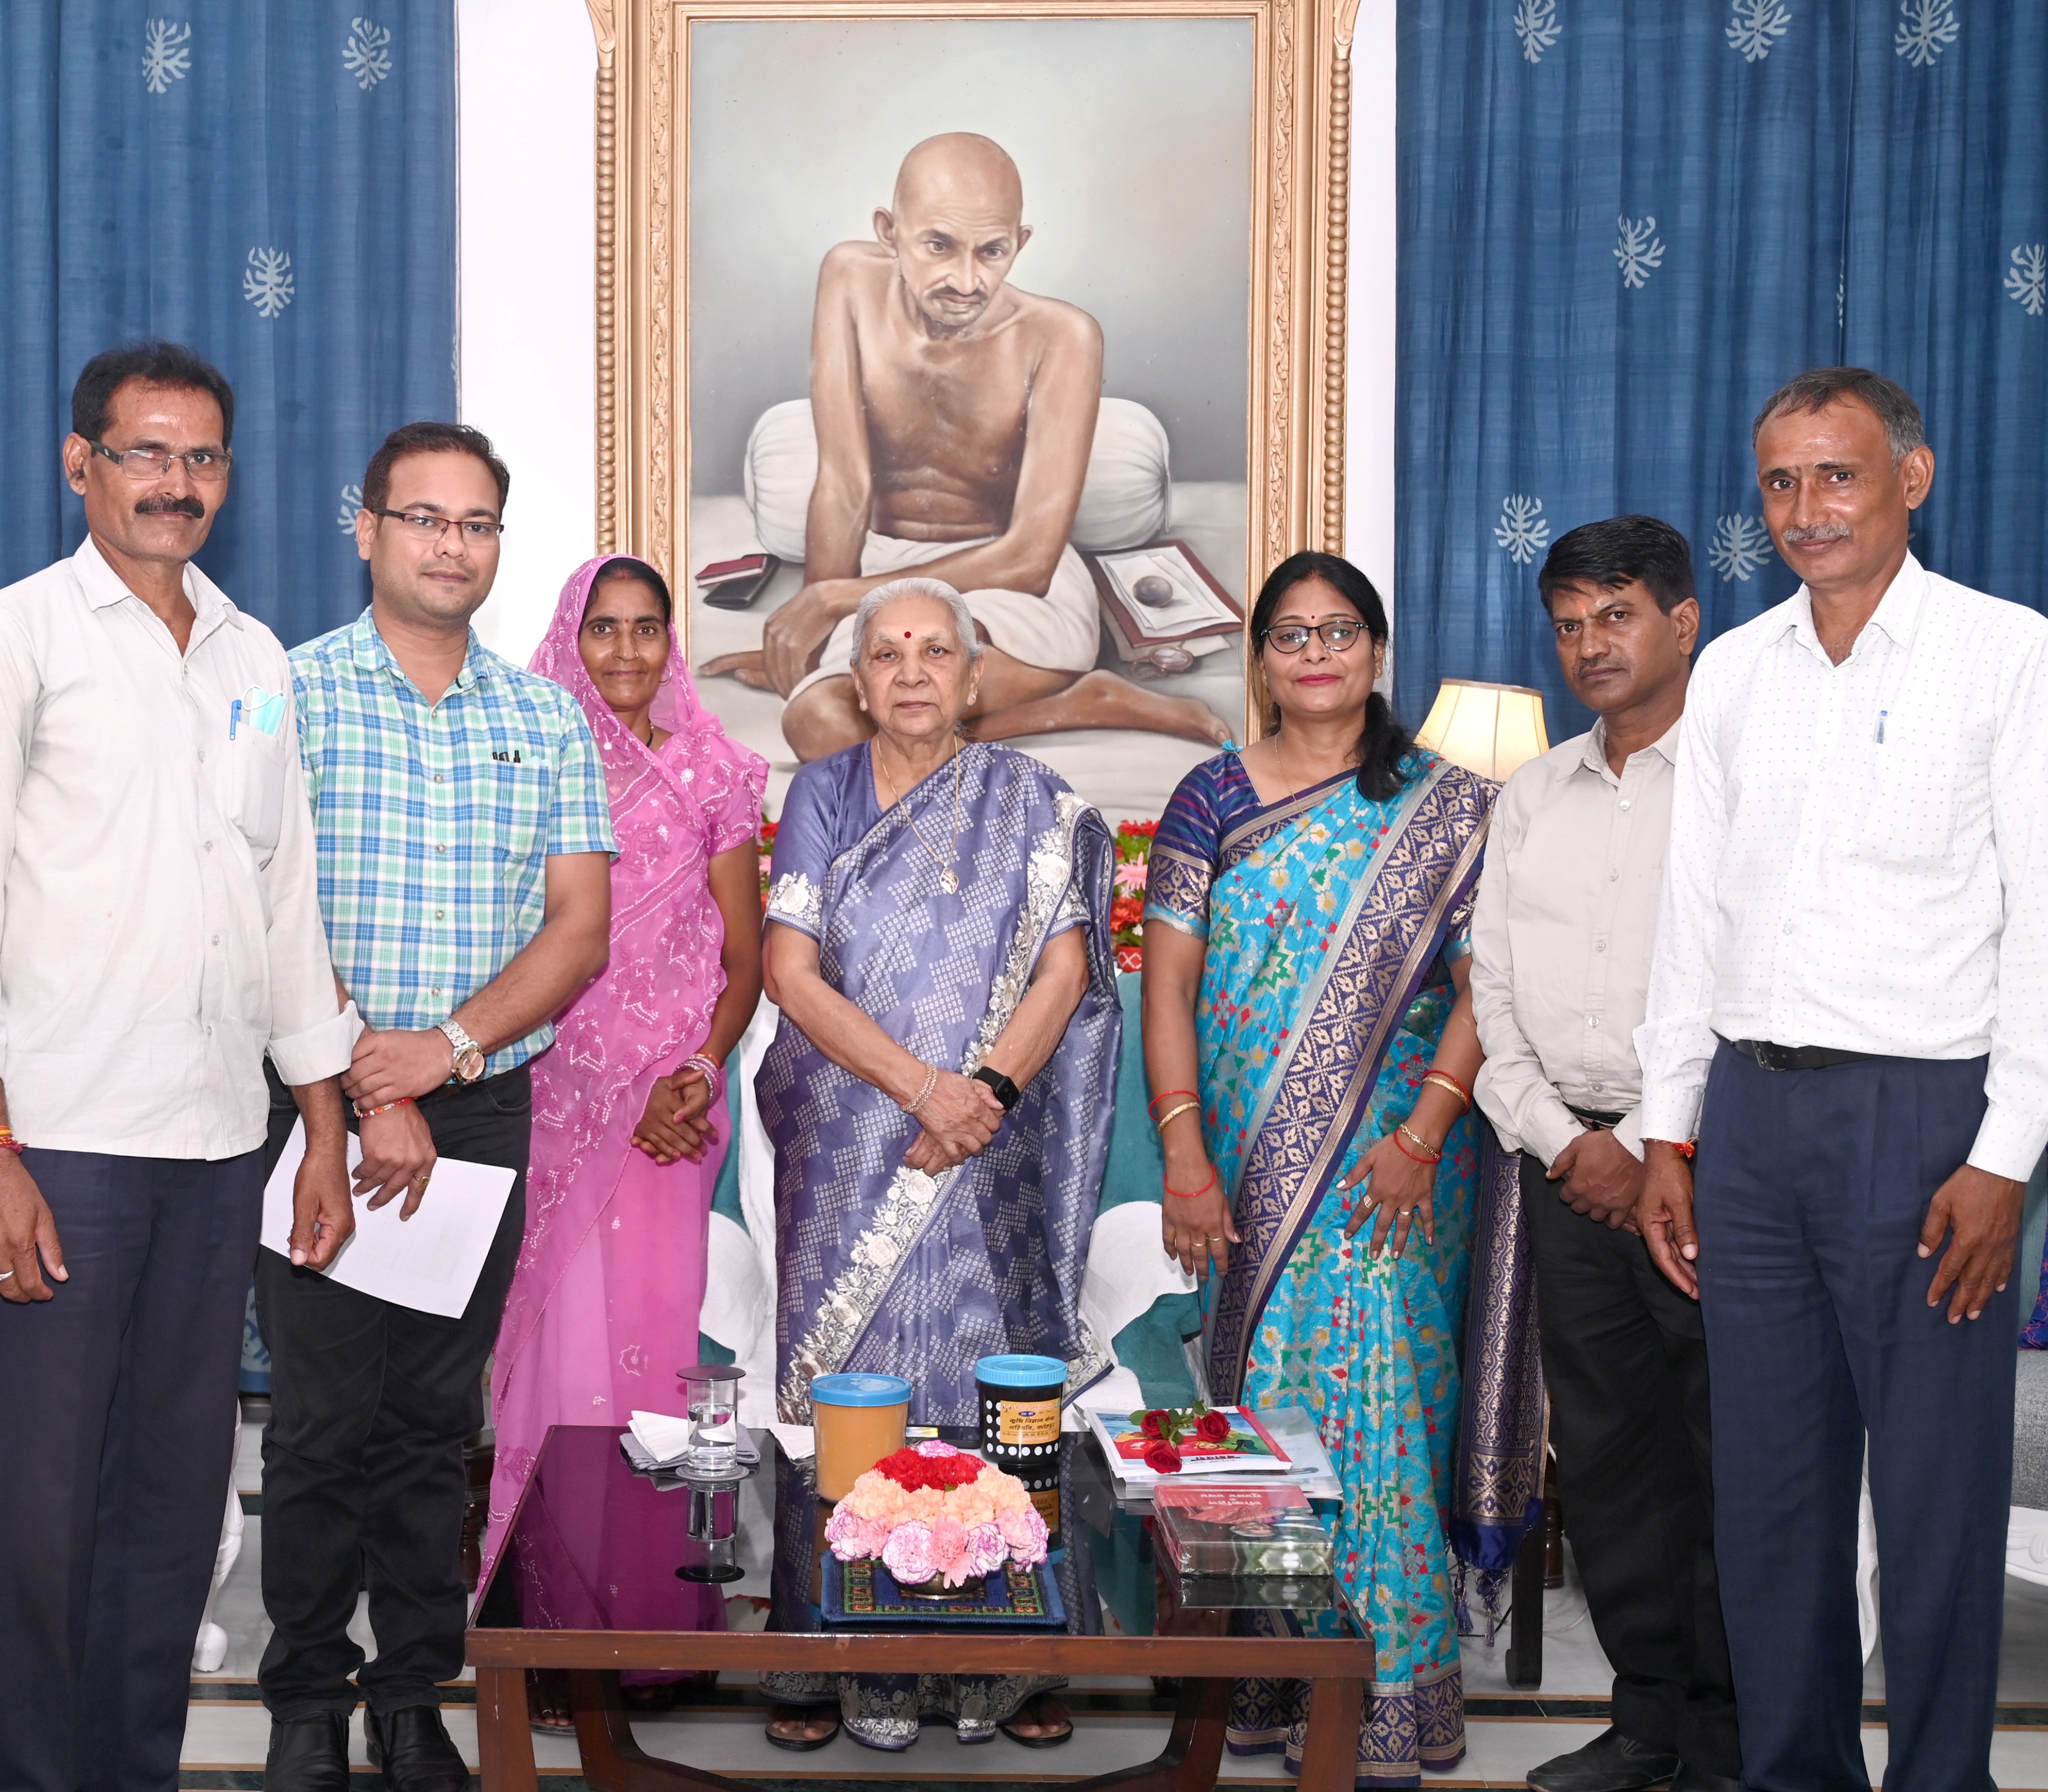 Progressive farmers from Fatehpur district made a courtesy call on the Governor